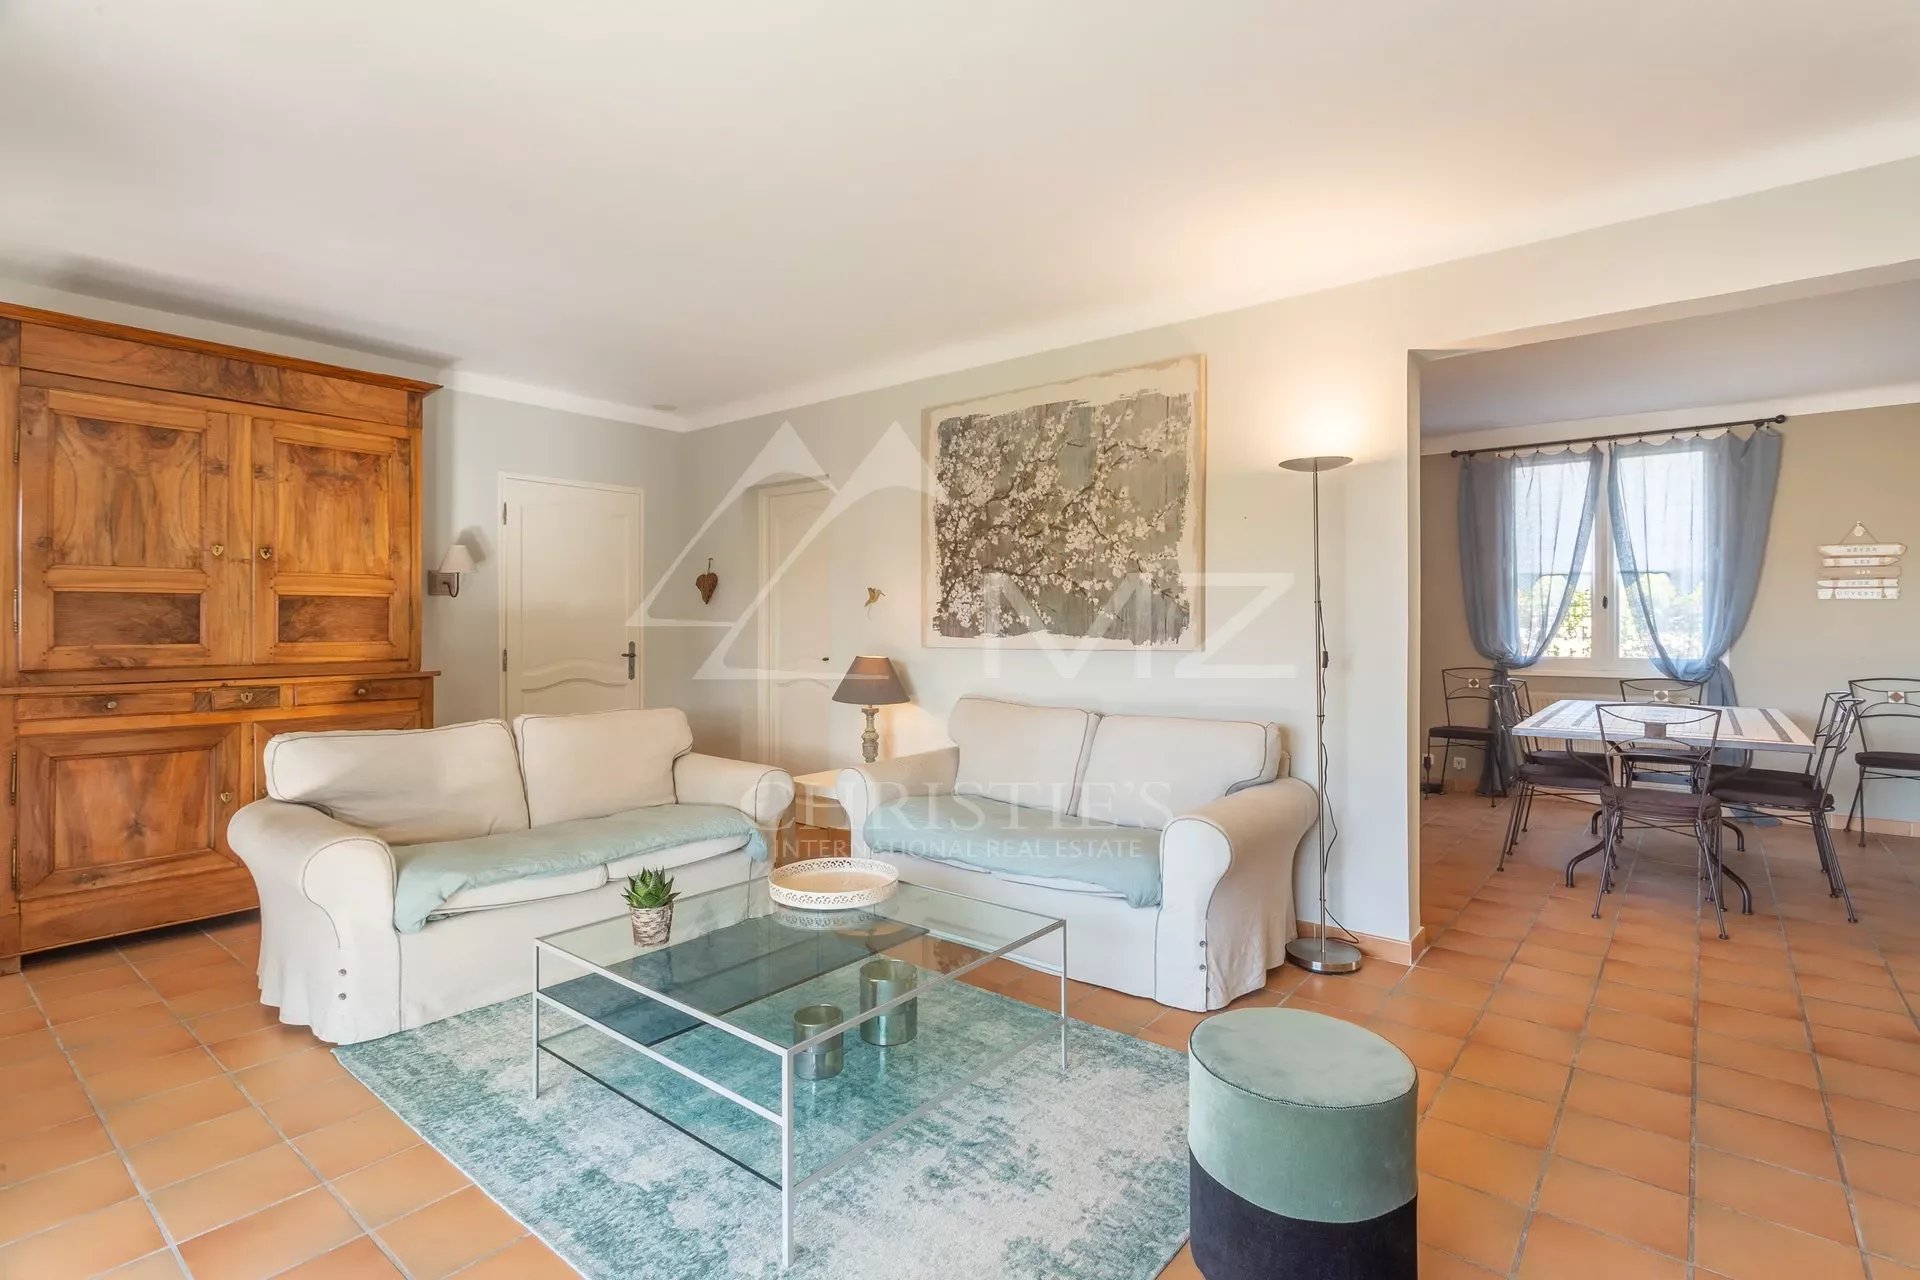 Cabrières d'Avignon - Beautiful villa with heated pool